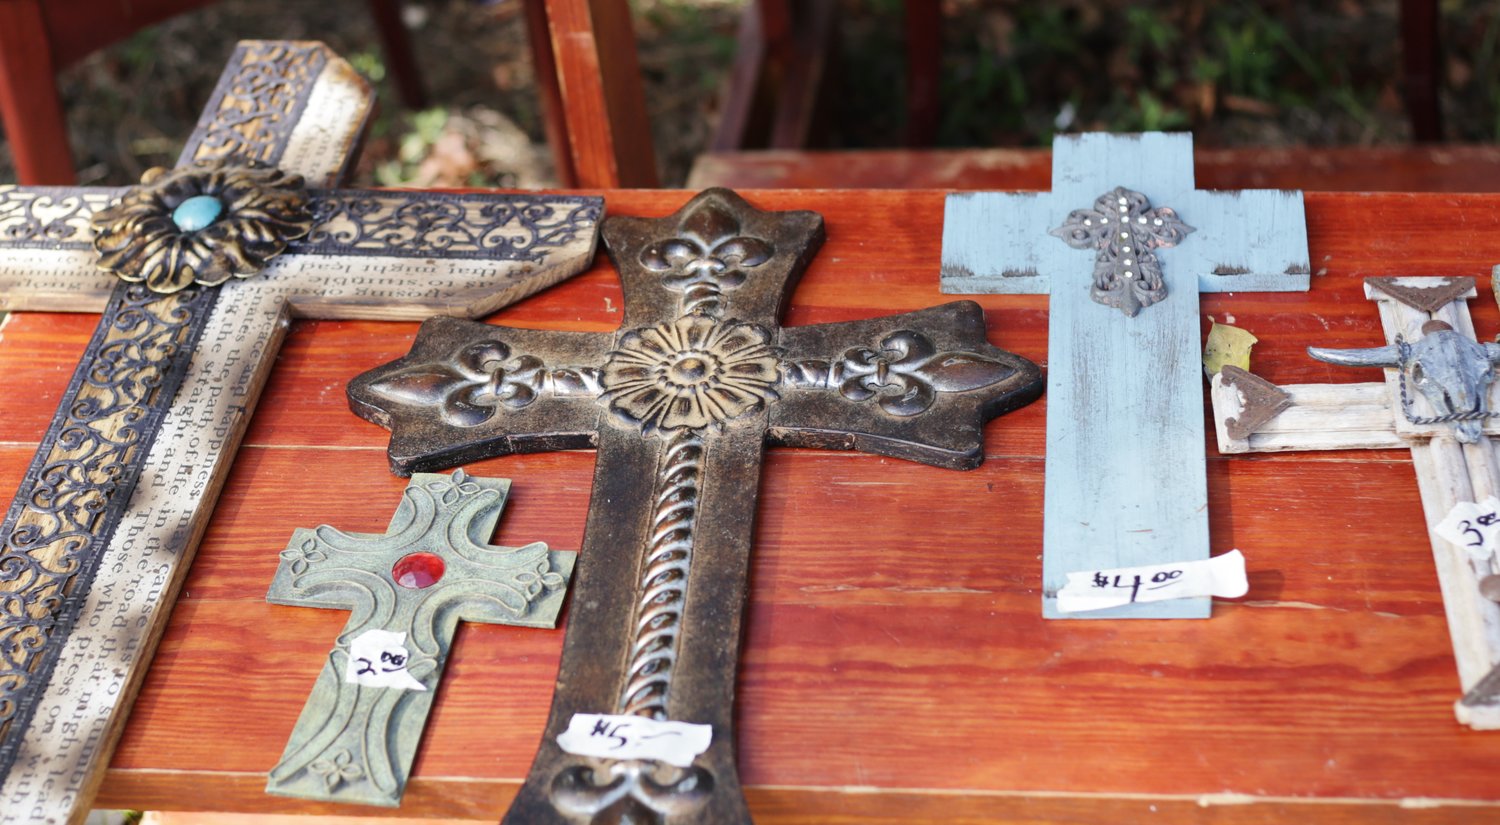 A collection of unique and beautiful crosses were among the offerings of Thomas Parker of Athens and Laura Holster of Winnsboro.